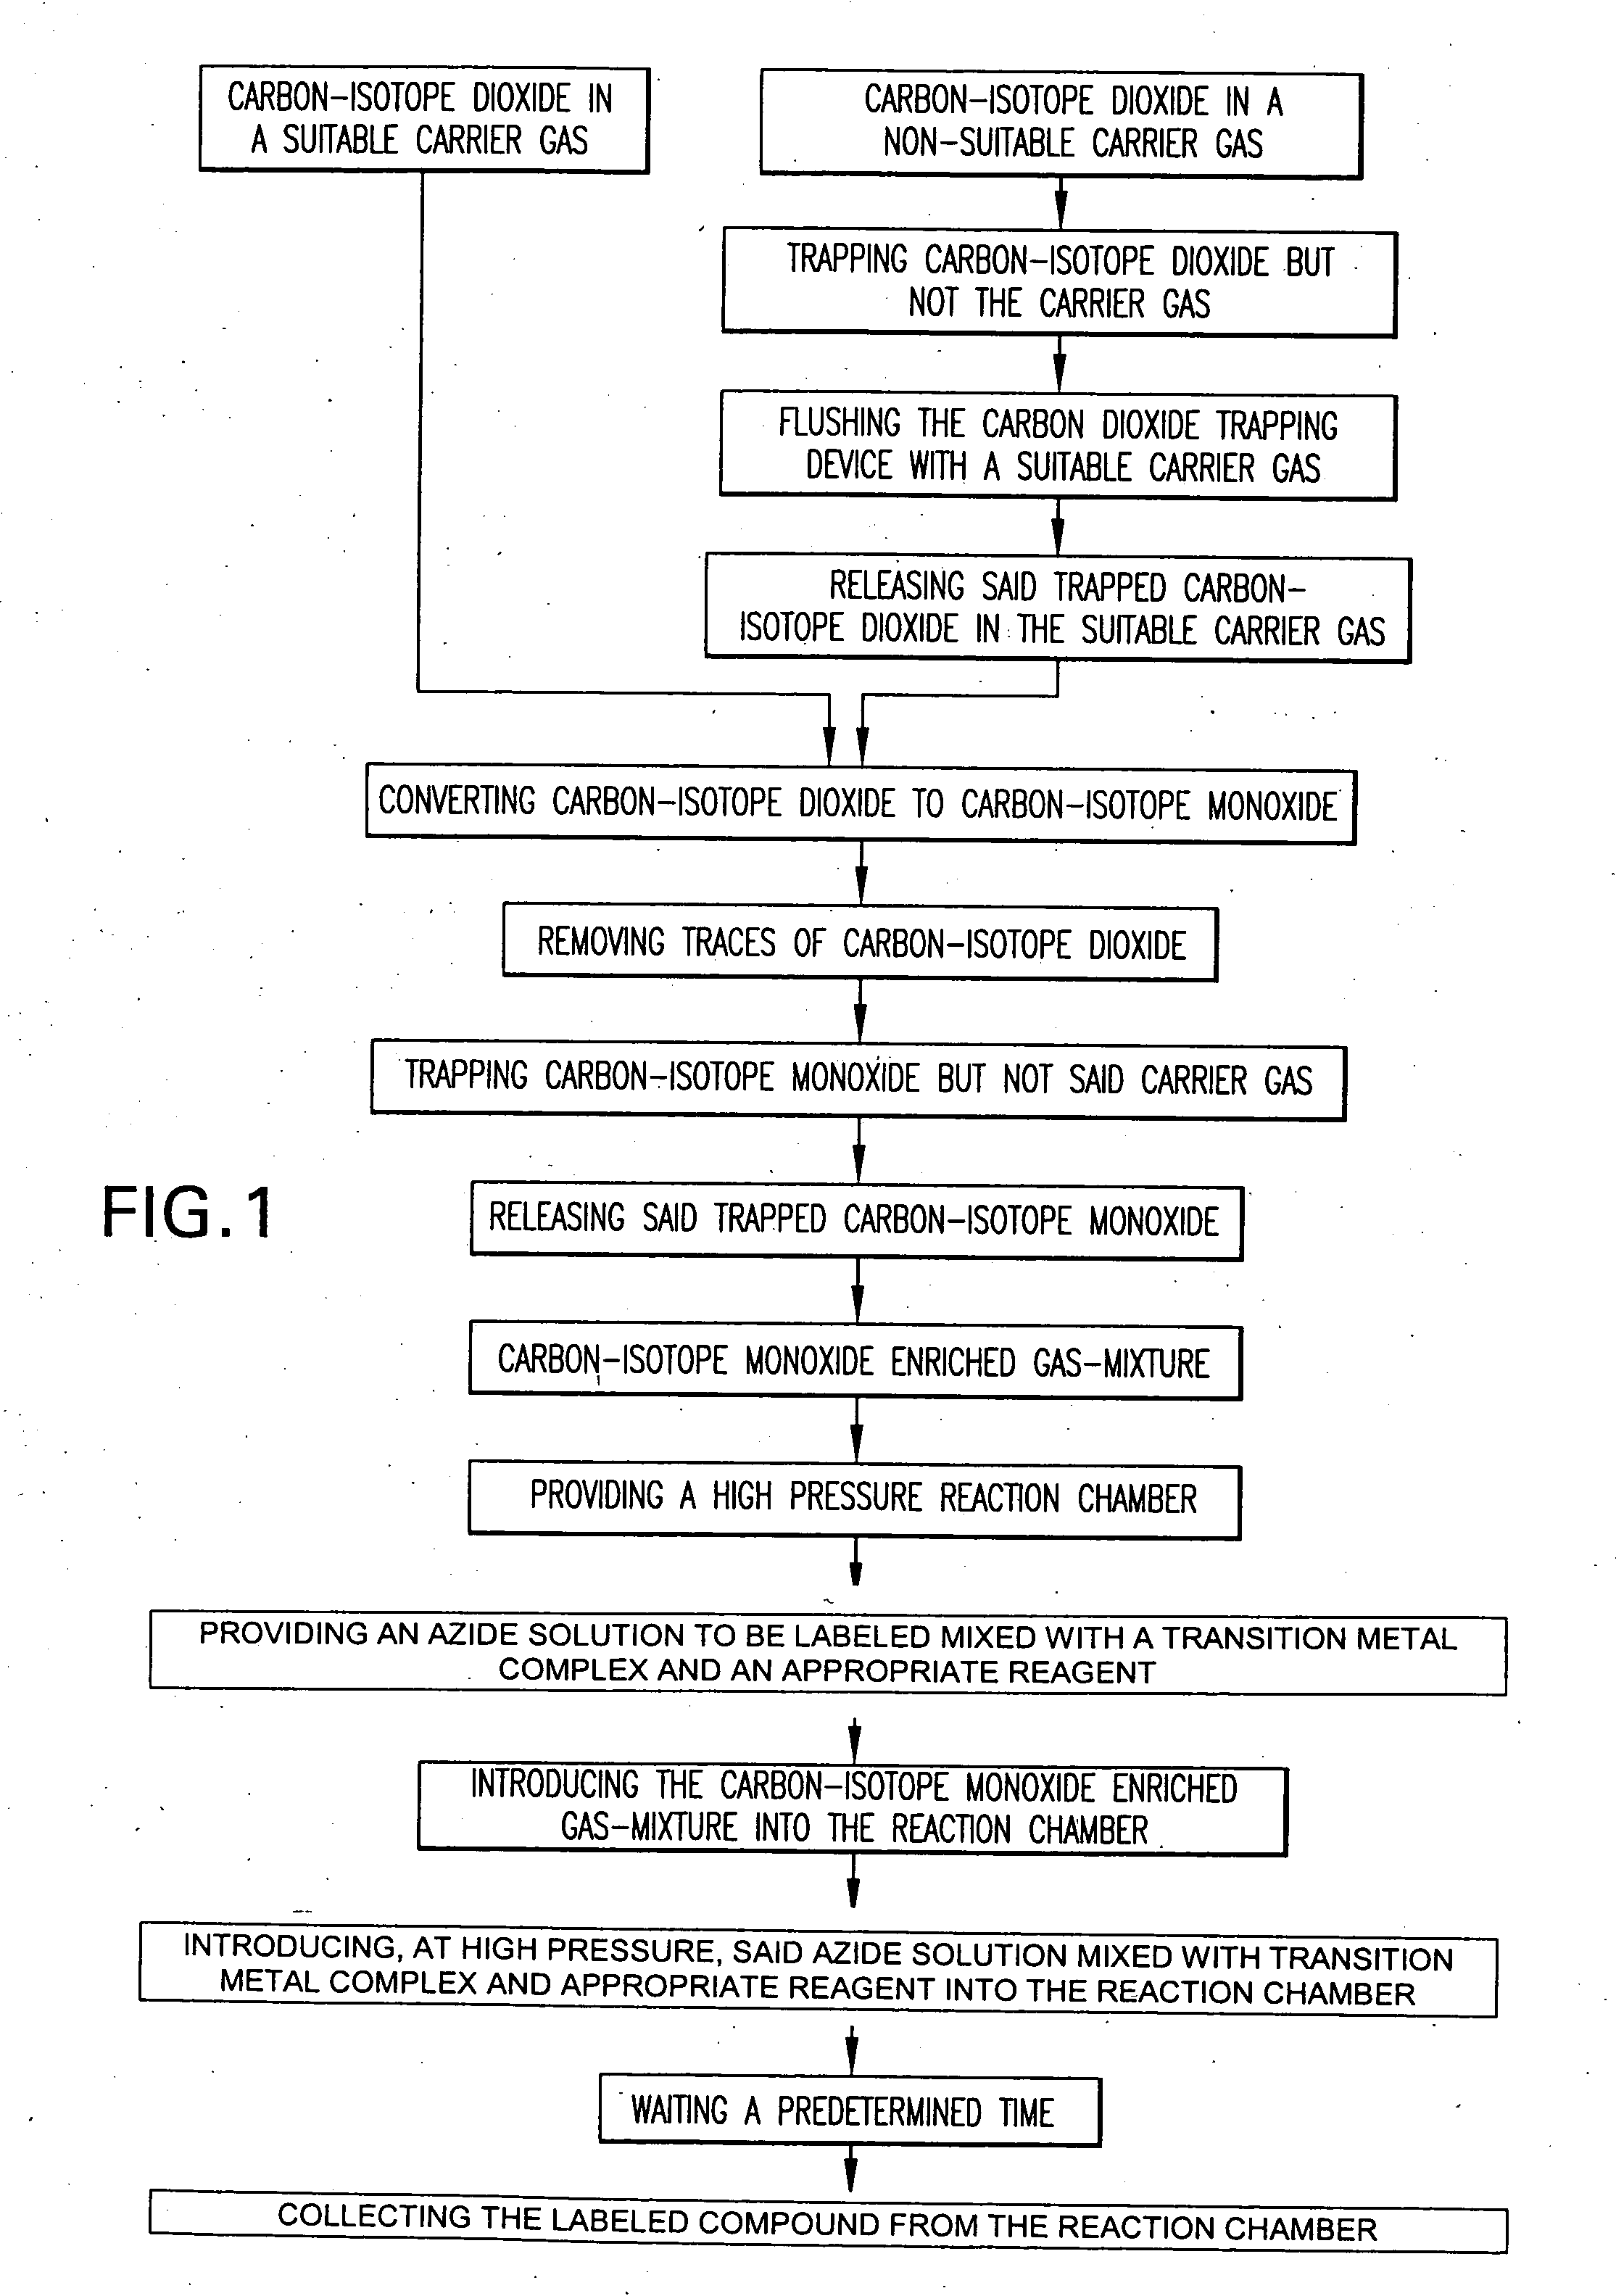 Methods for carbon isotope labeling synthesis by transition metal-promoted carbonylation via isocyanate using azides and carbon-isotope monoxide